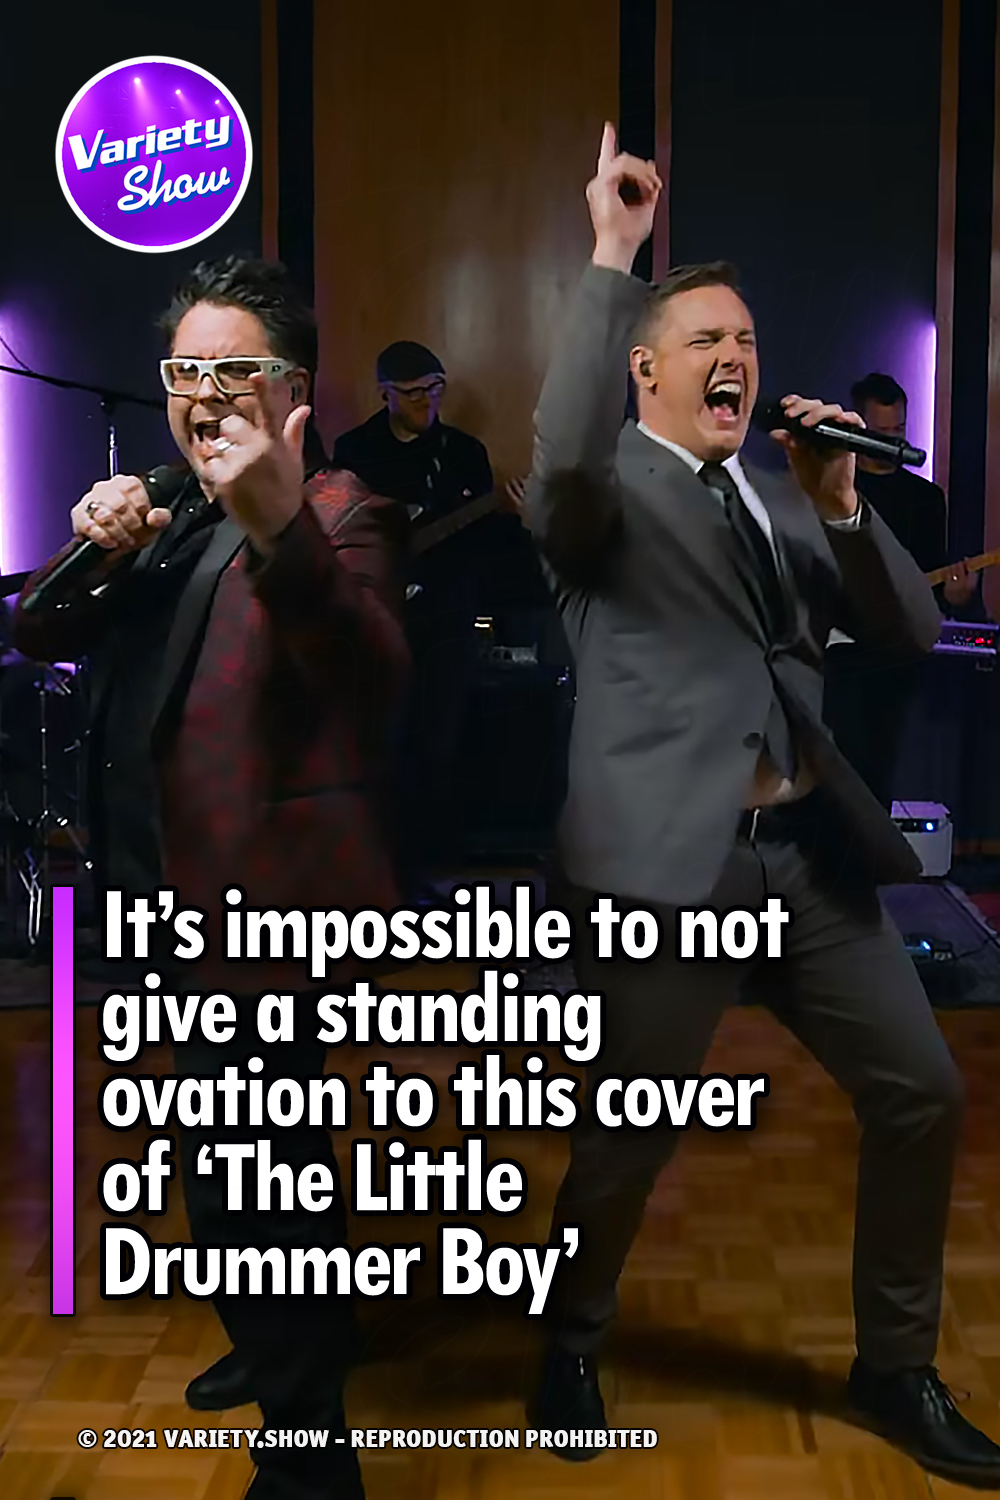 It’s impossible to not give a standing ovation to this cover of ‘The Little Drummer Boy’